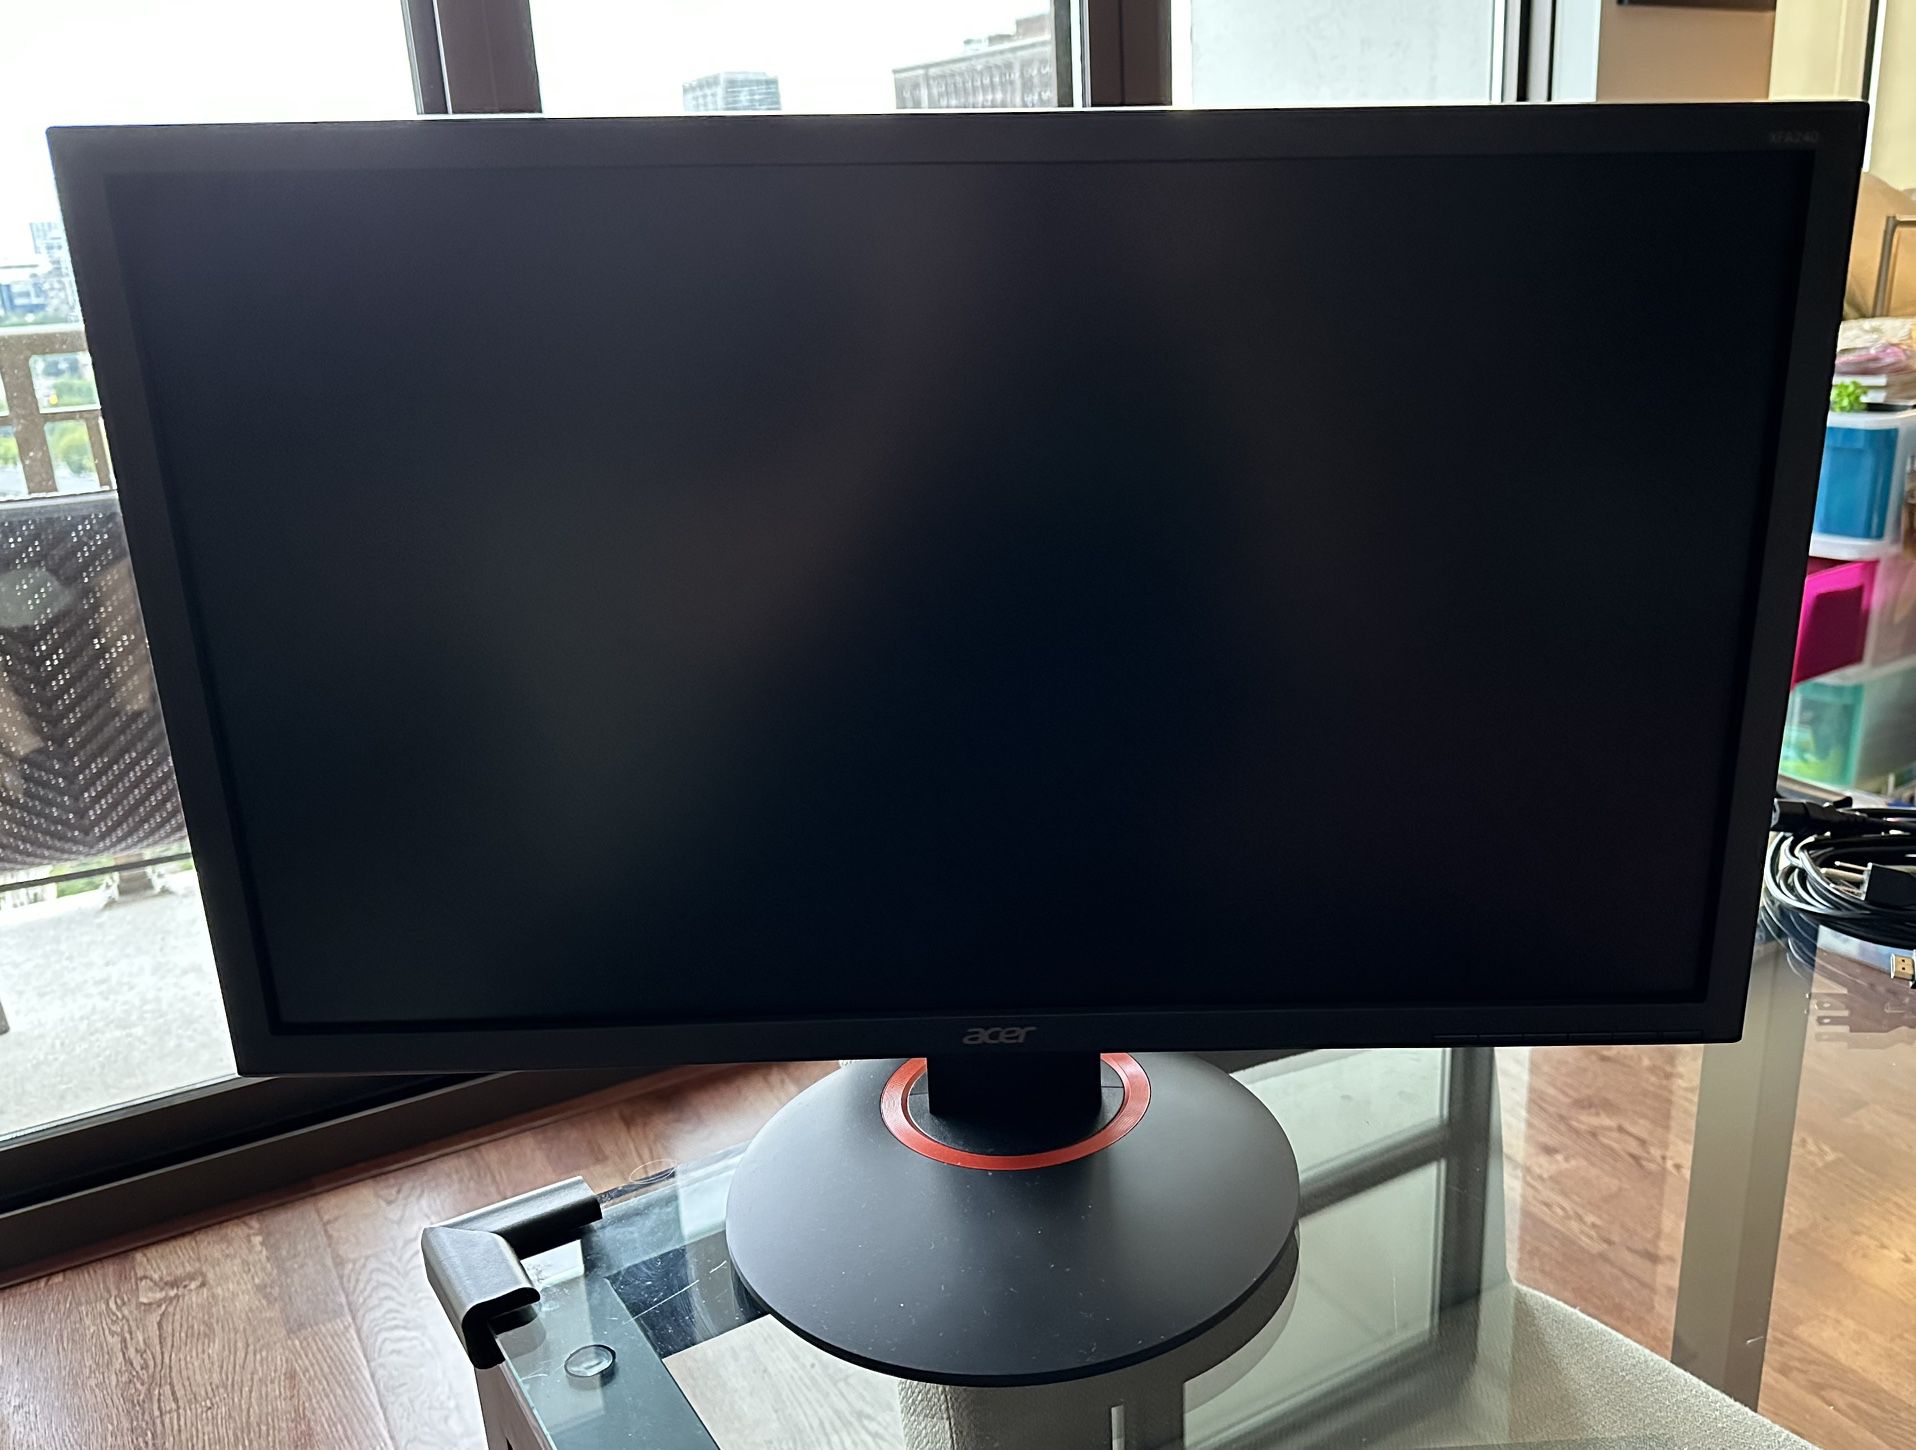 Acer XFA240 24in Monitor